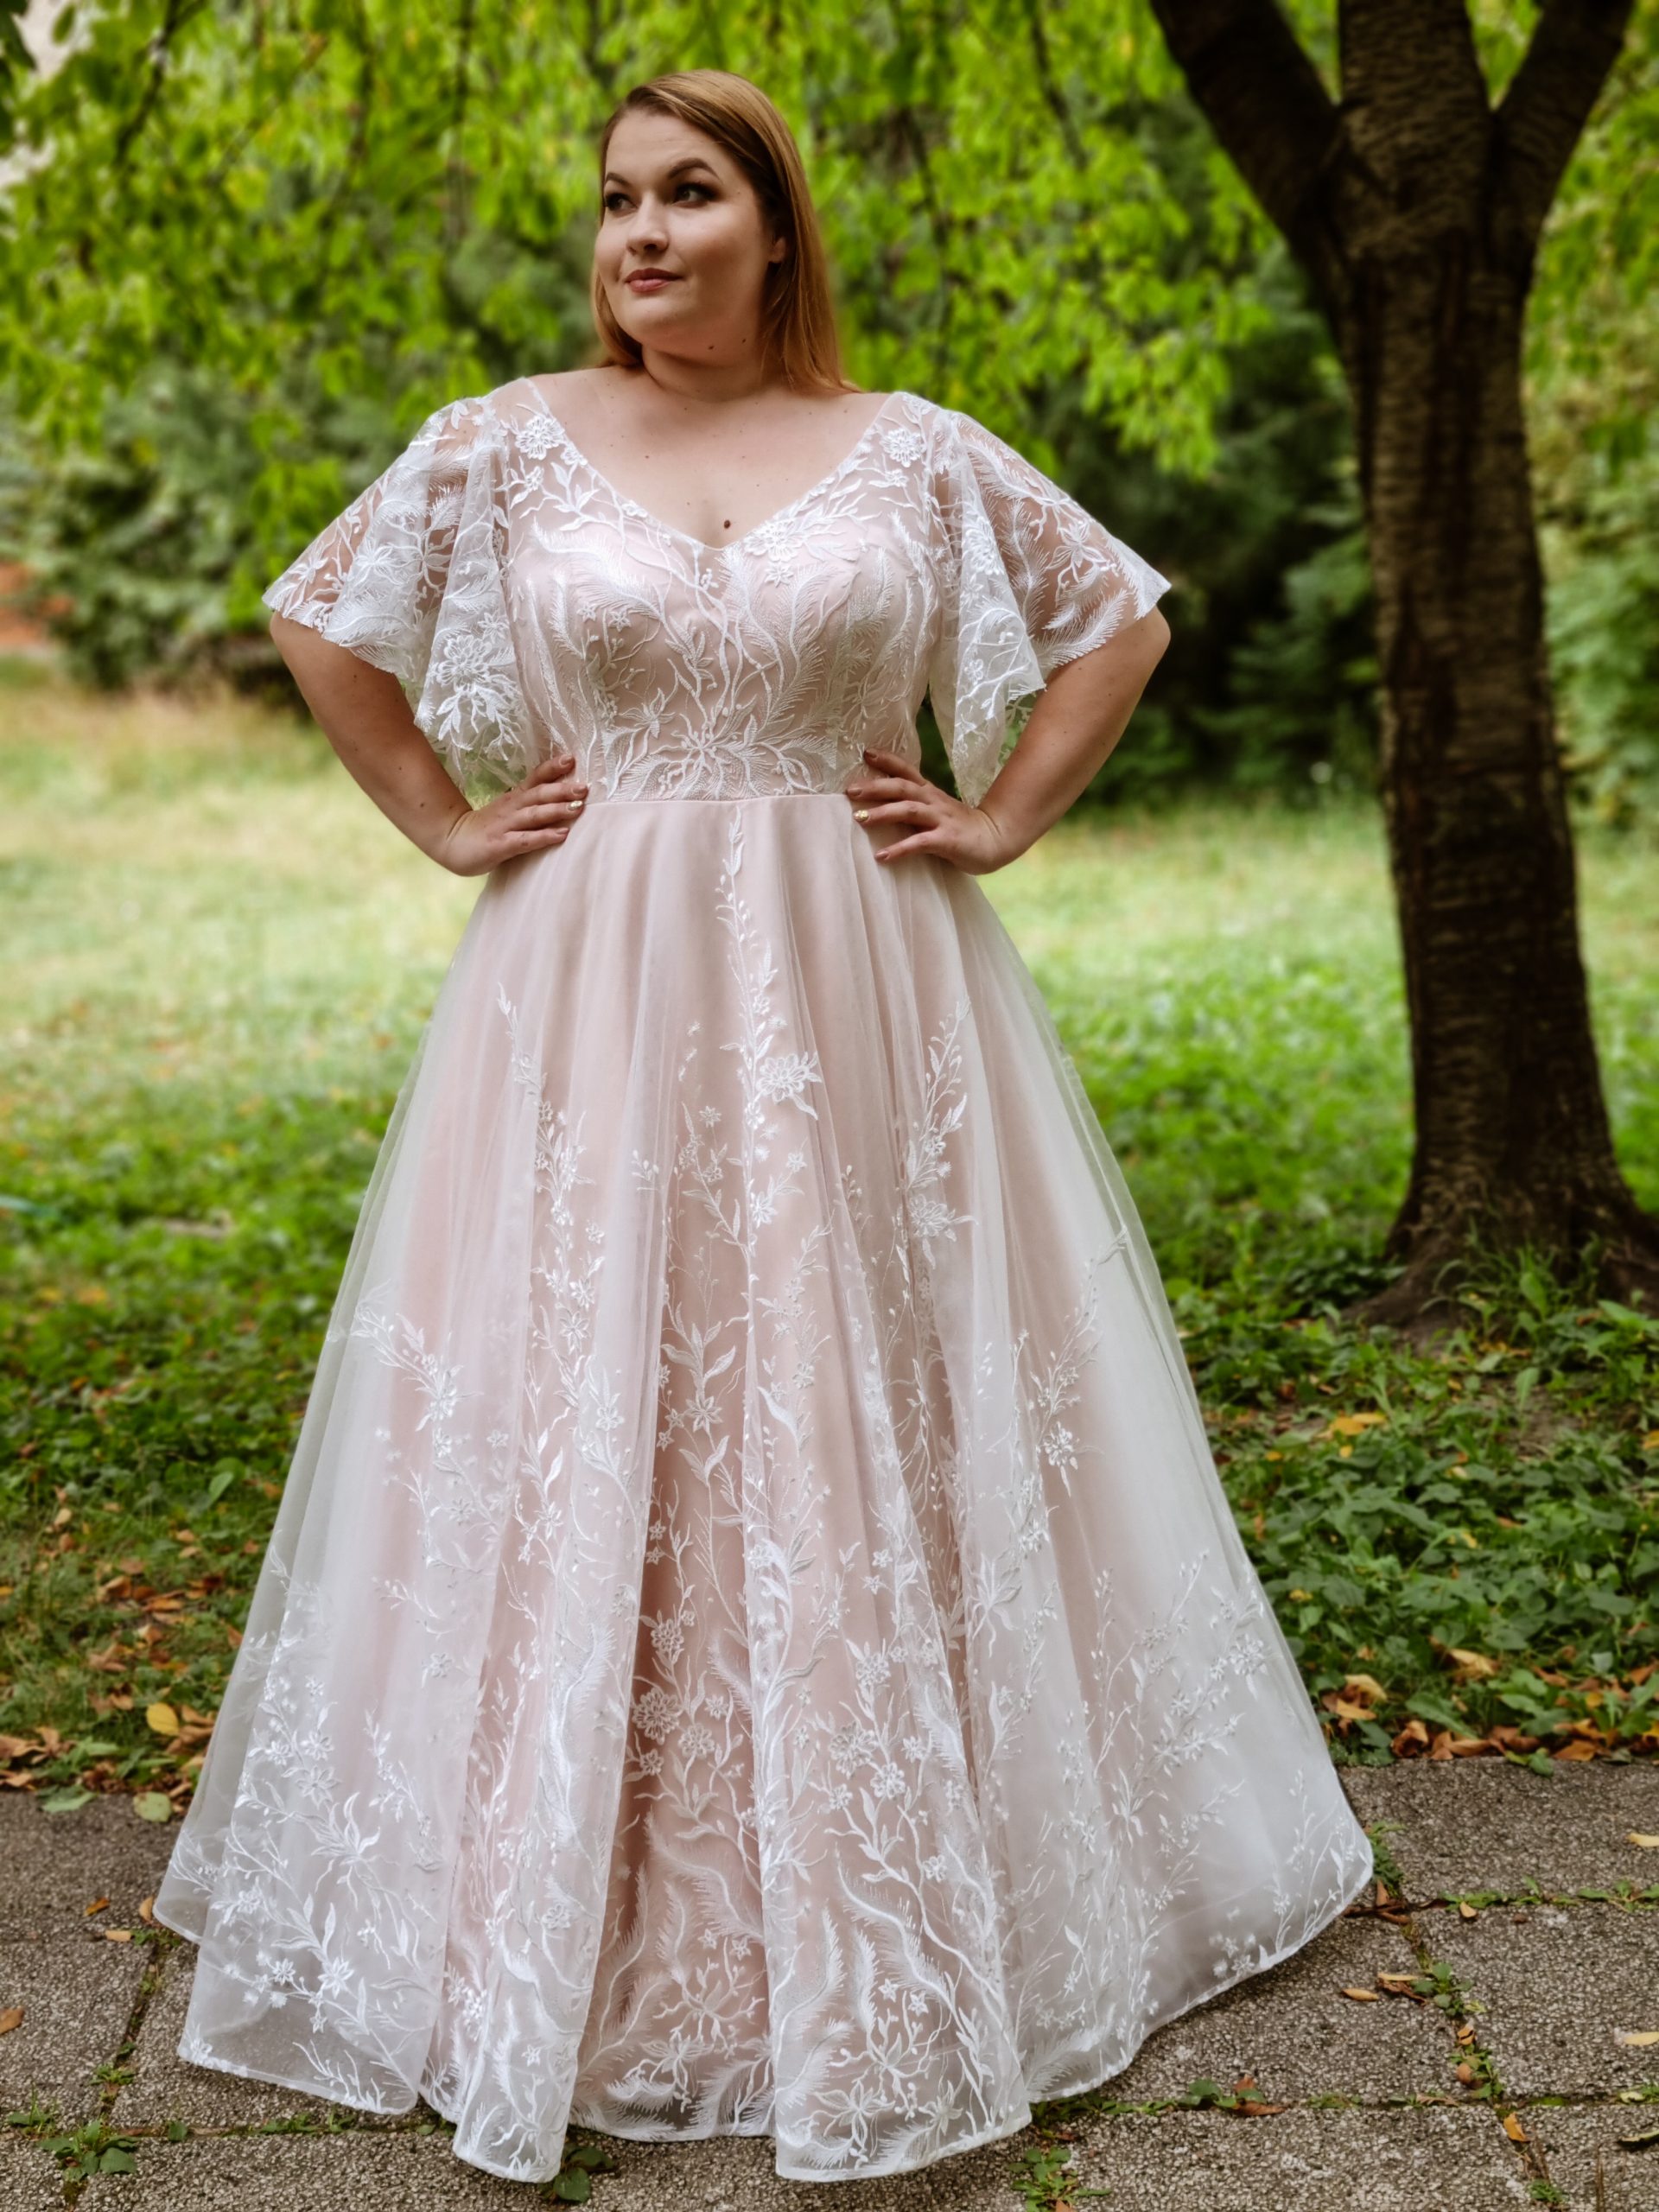 plus-size-wedding-dresses-to-let-you-shine-armchair-theology